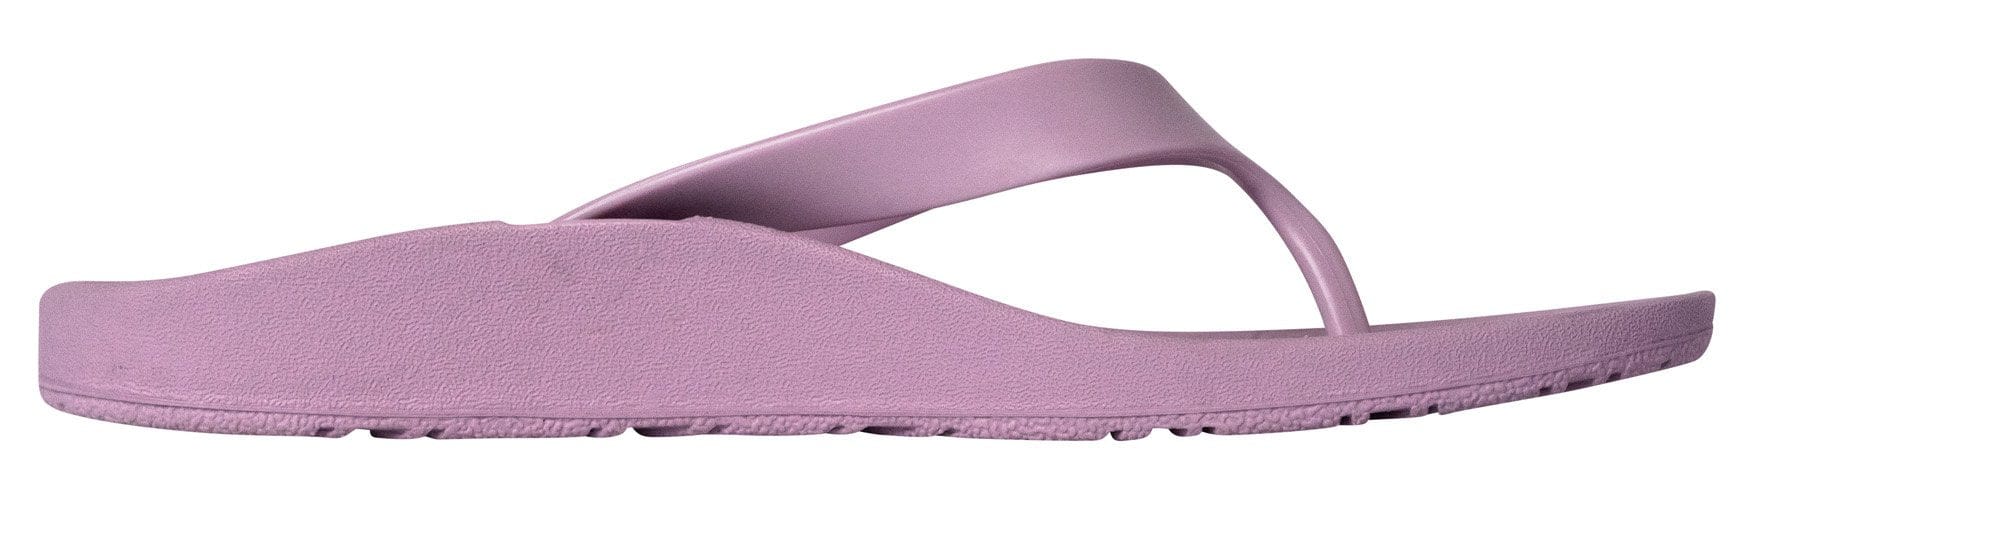 Foot HQ Footwear Archline Orthotic Arch Support Flip Flop Thongs (Lilac Purple)